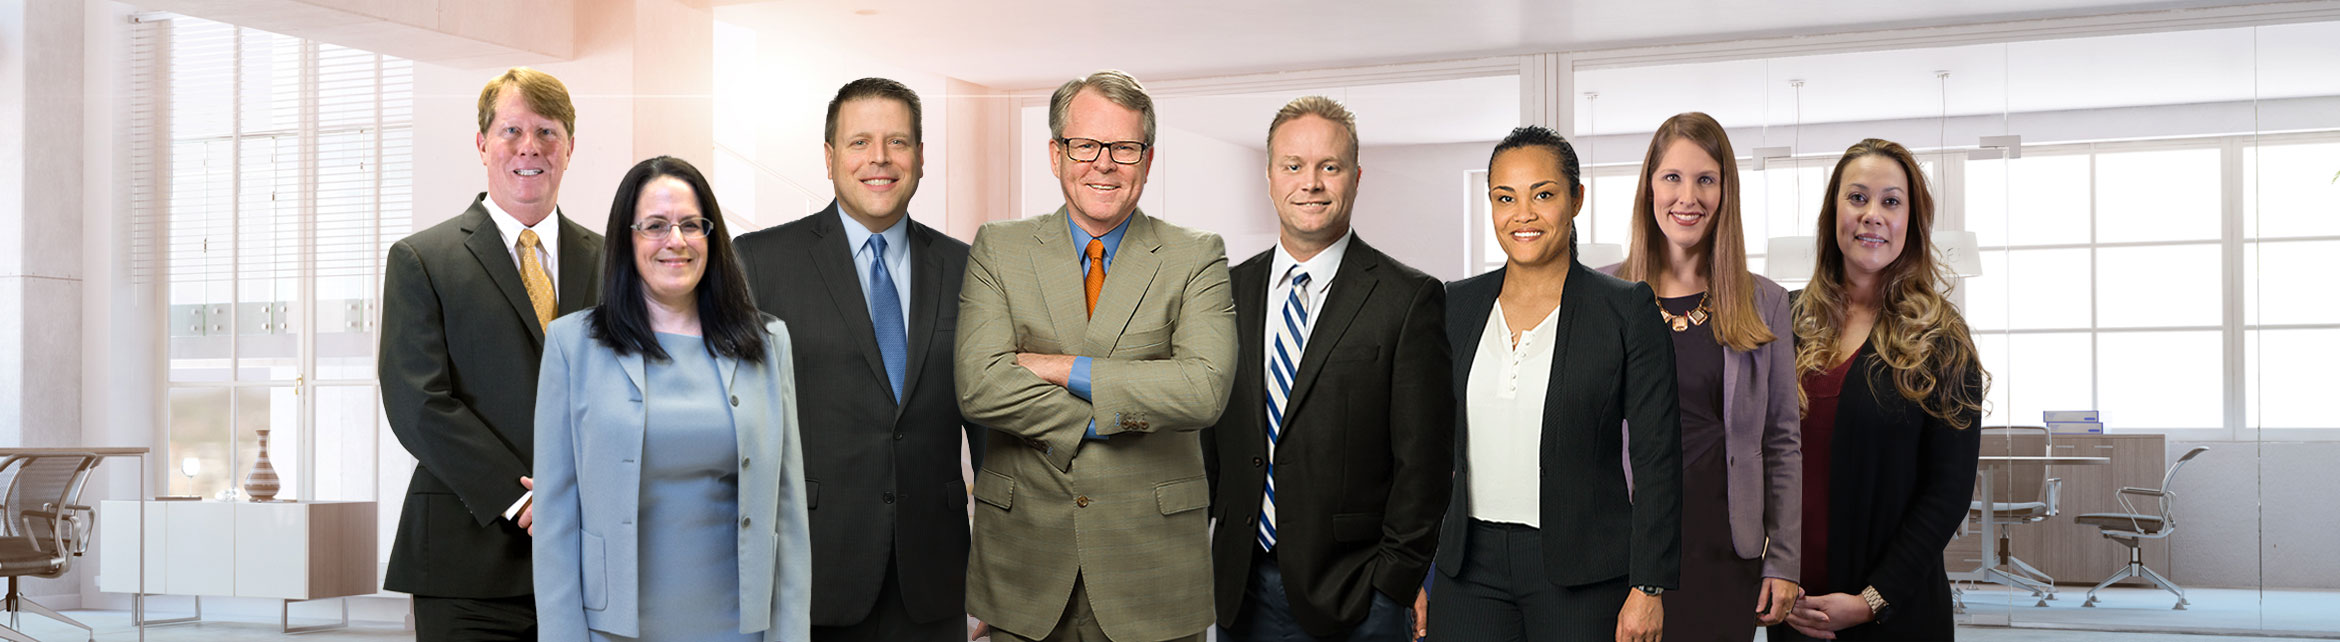 Business Valuation, Inc Team members